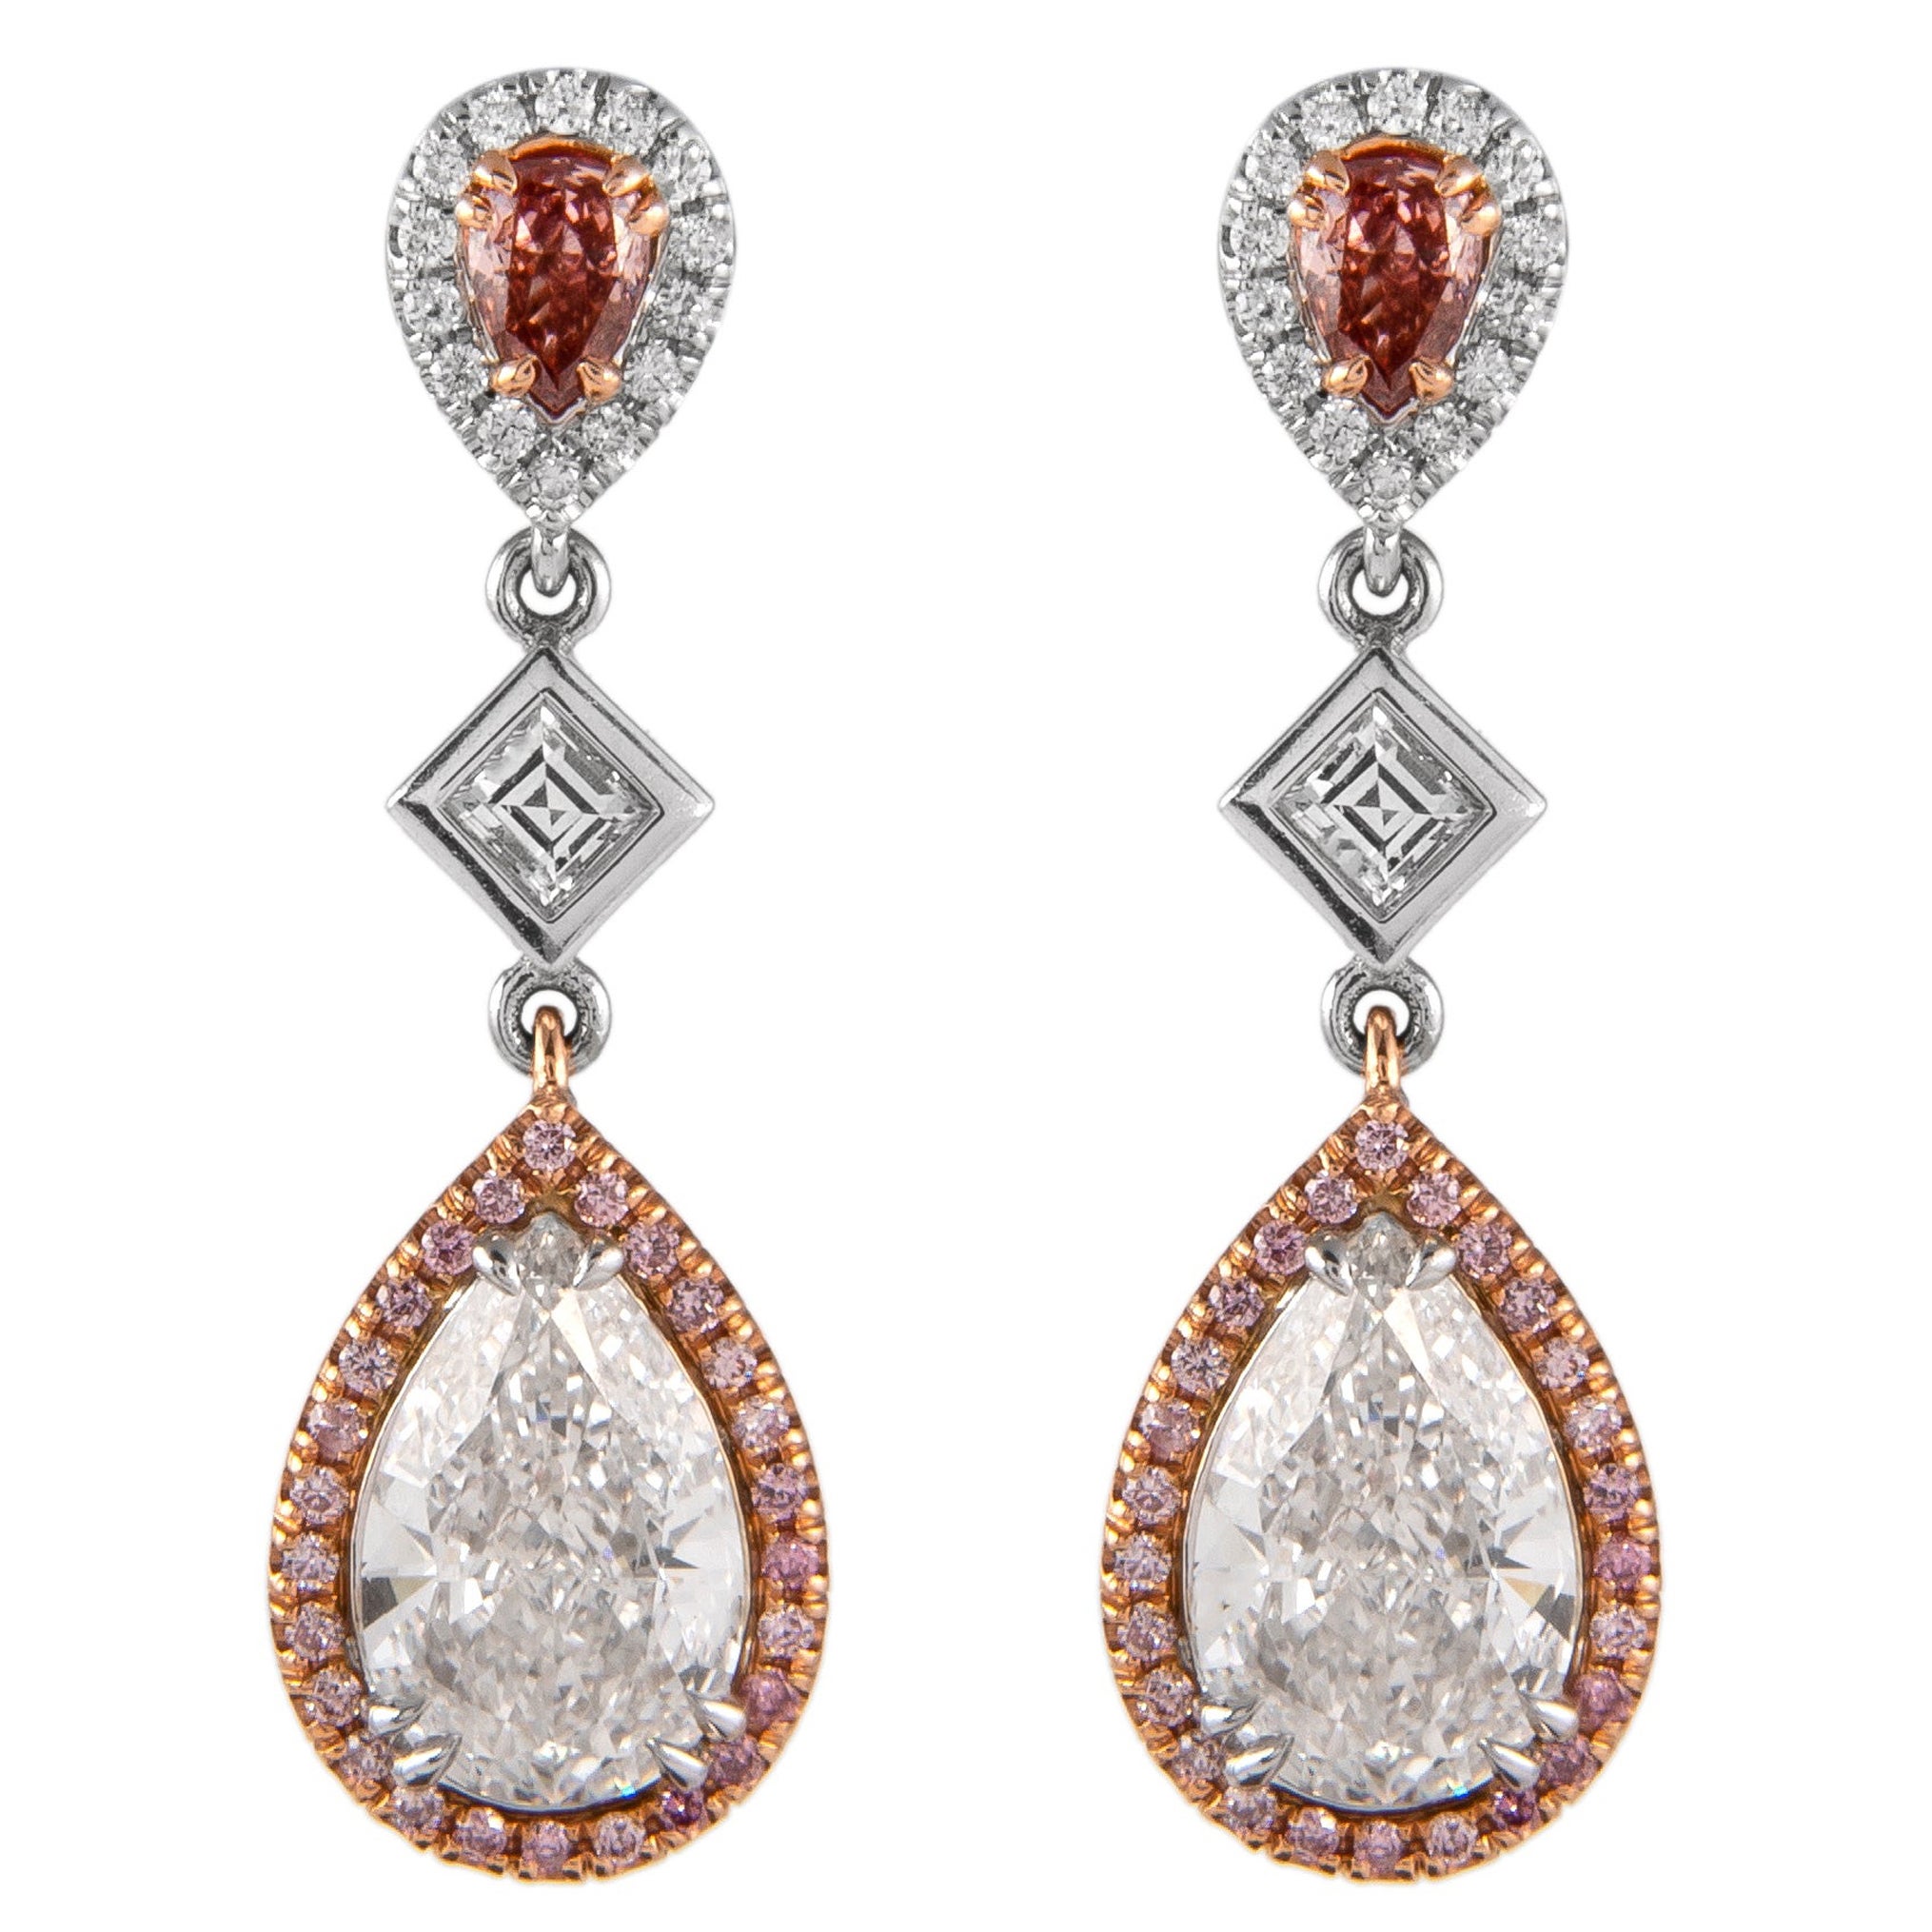 Alexander 5.11ct Pear F color Diamonds with Fancy Instence Pink Diamond Earrings